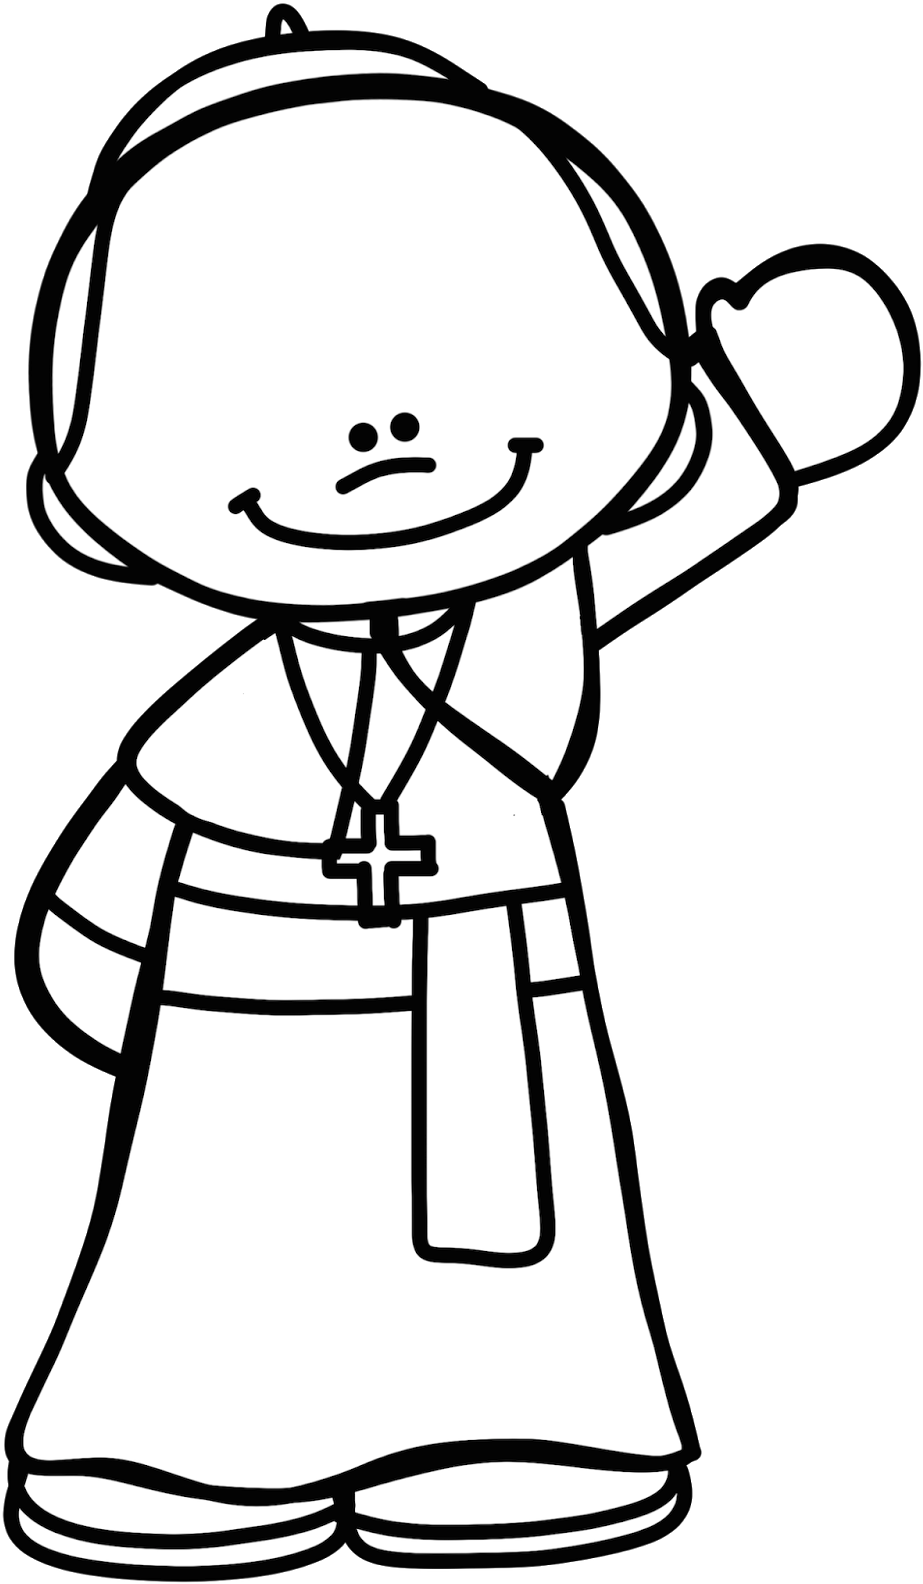 Here Is An Image Of The Pope In Color And B&w - Pope Francis Clipart - Png Download (940x1600), Png Download